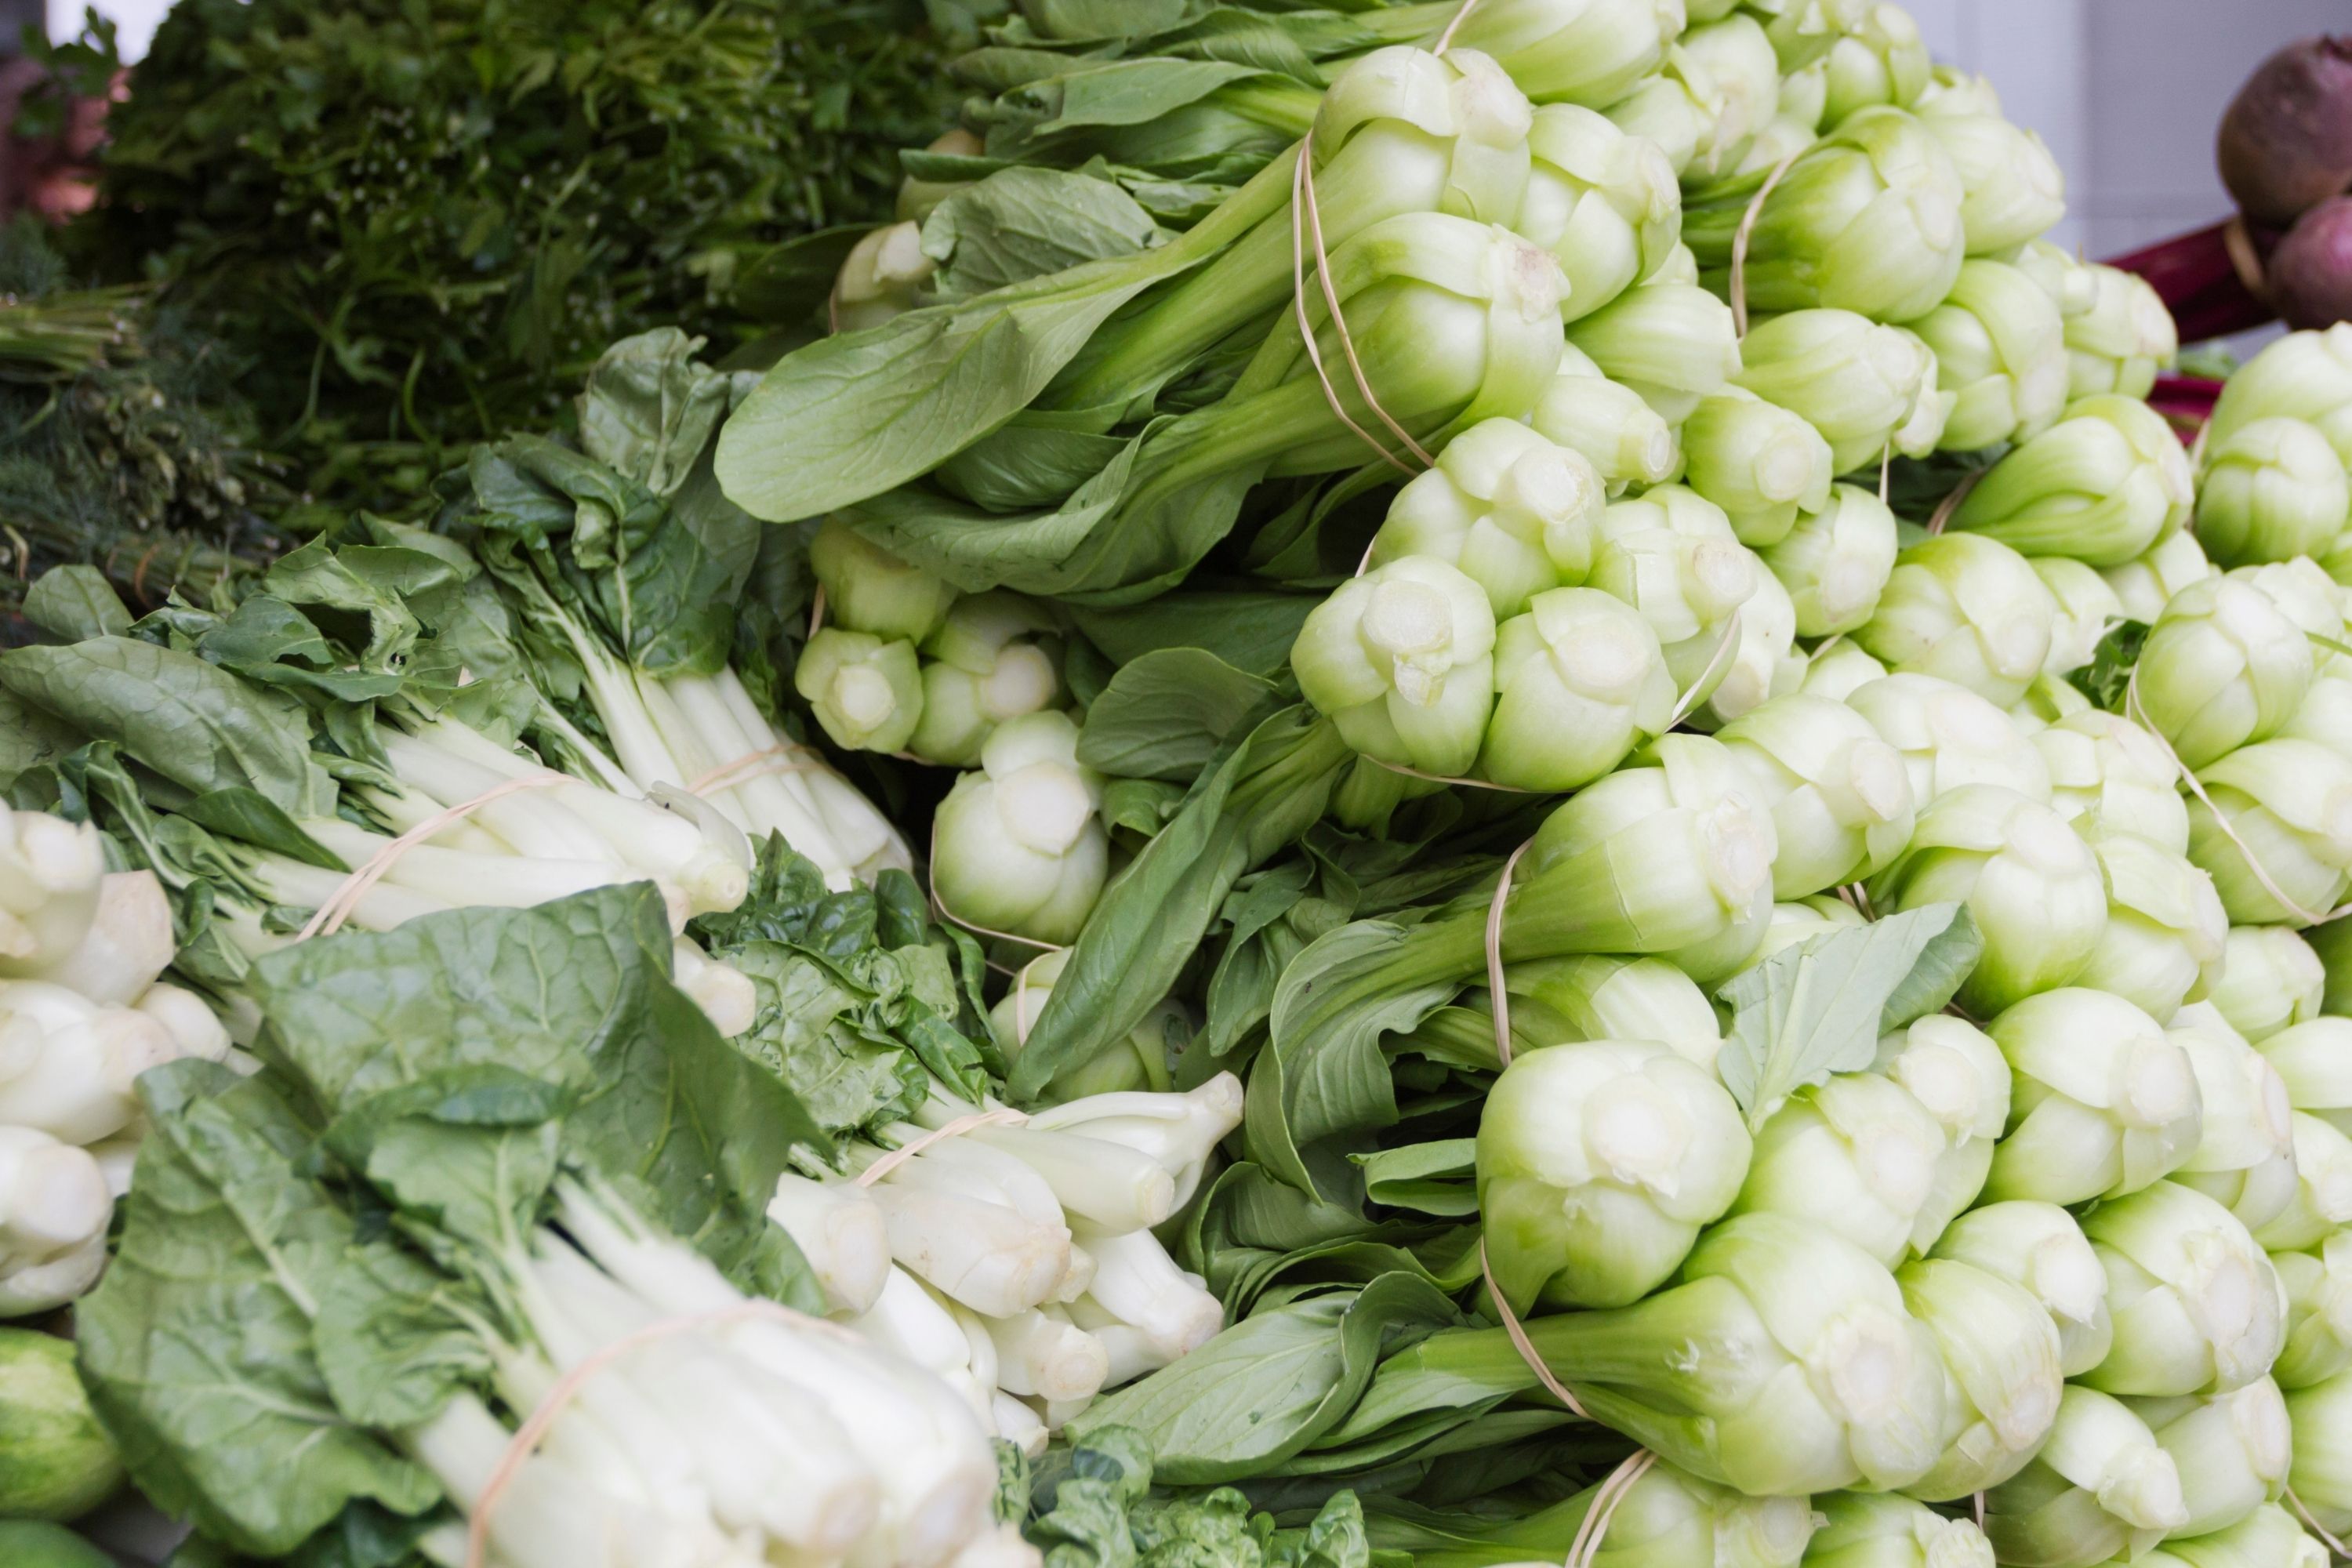 How to Freeze Bok Choy Step By Step